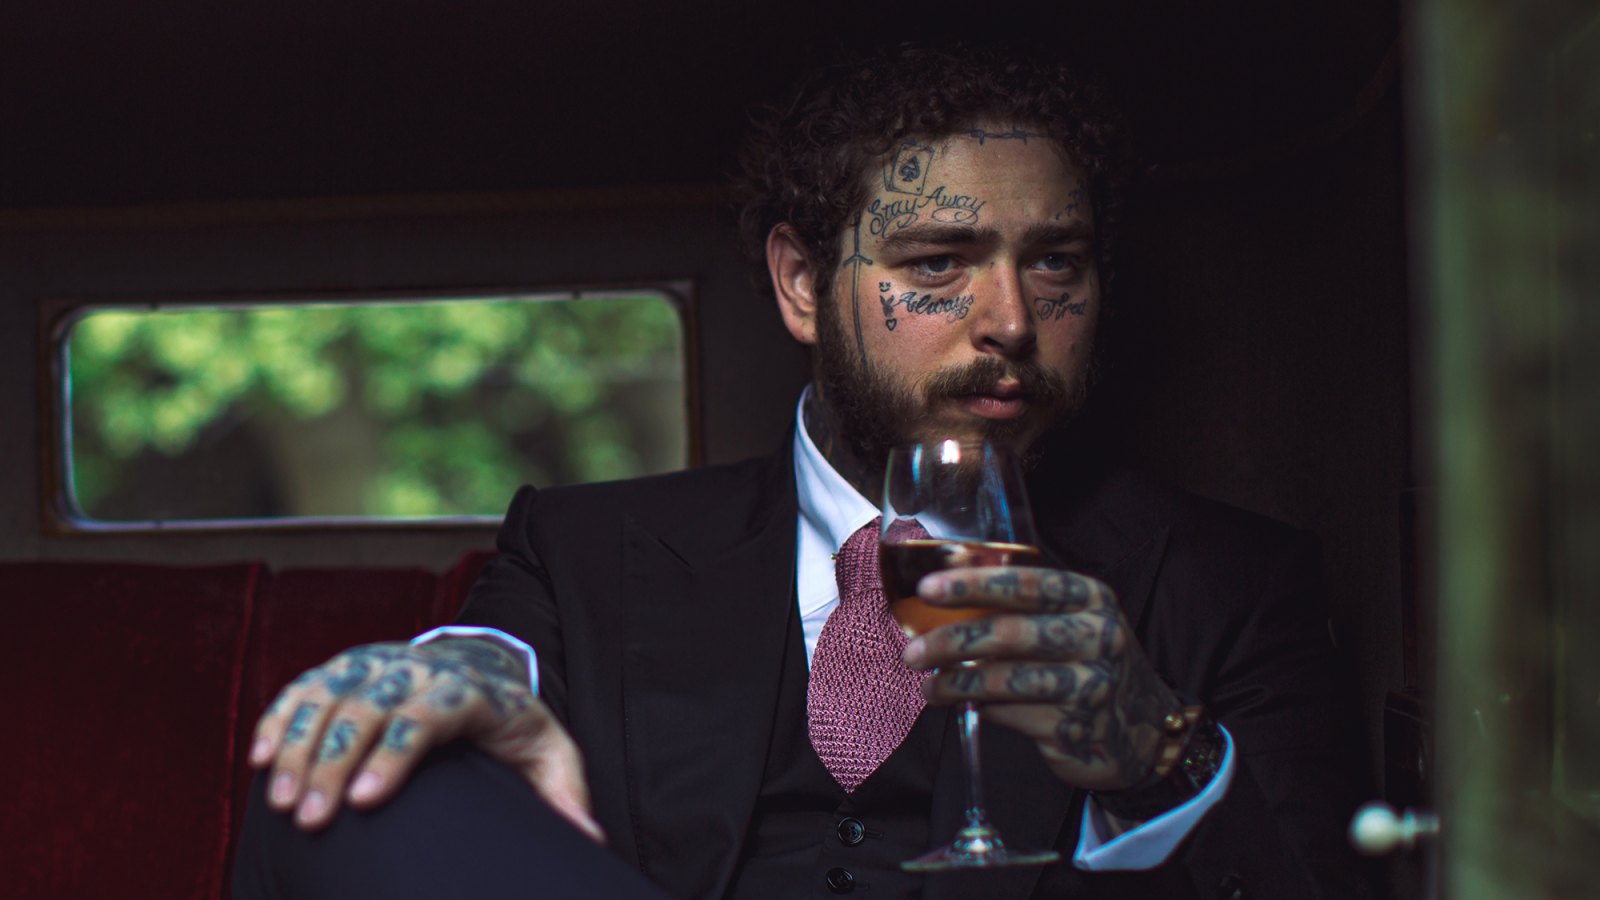 Post Malone Sold 50,000 Bottles of His Rose in 2 Days, But Fans Can Still Buy the Wine